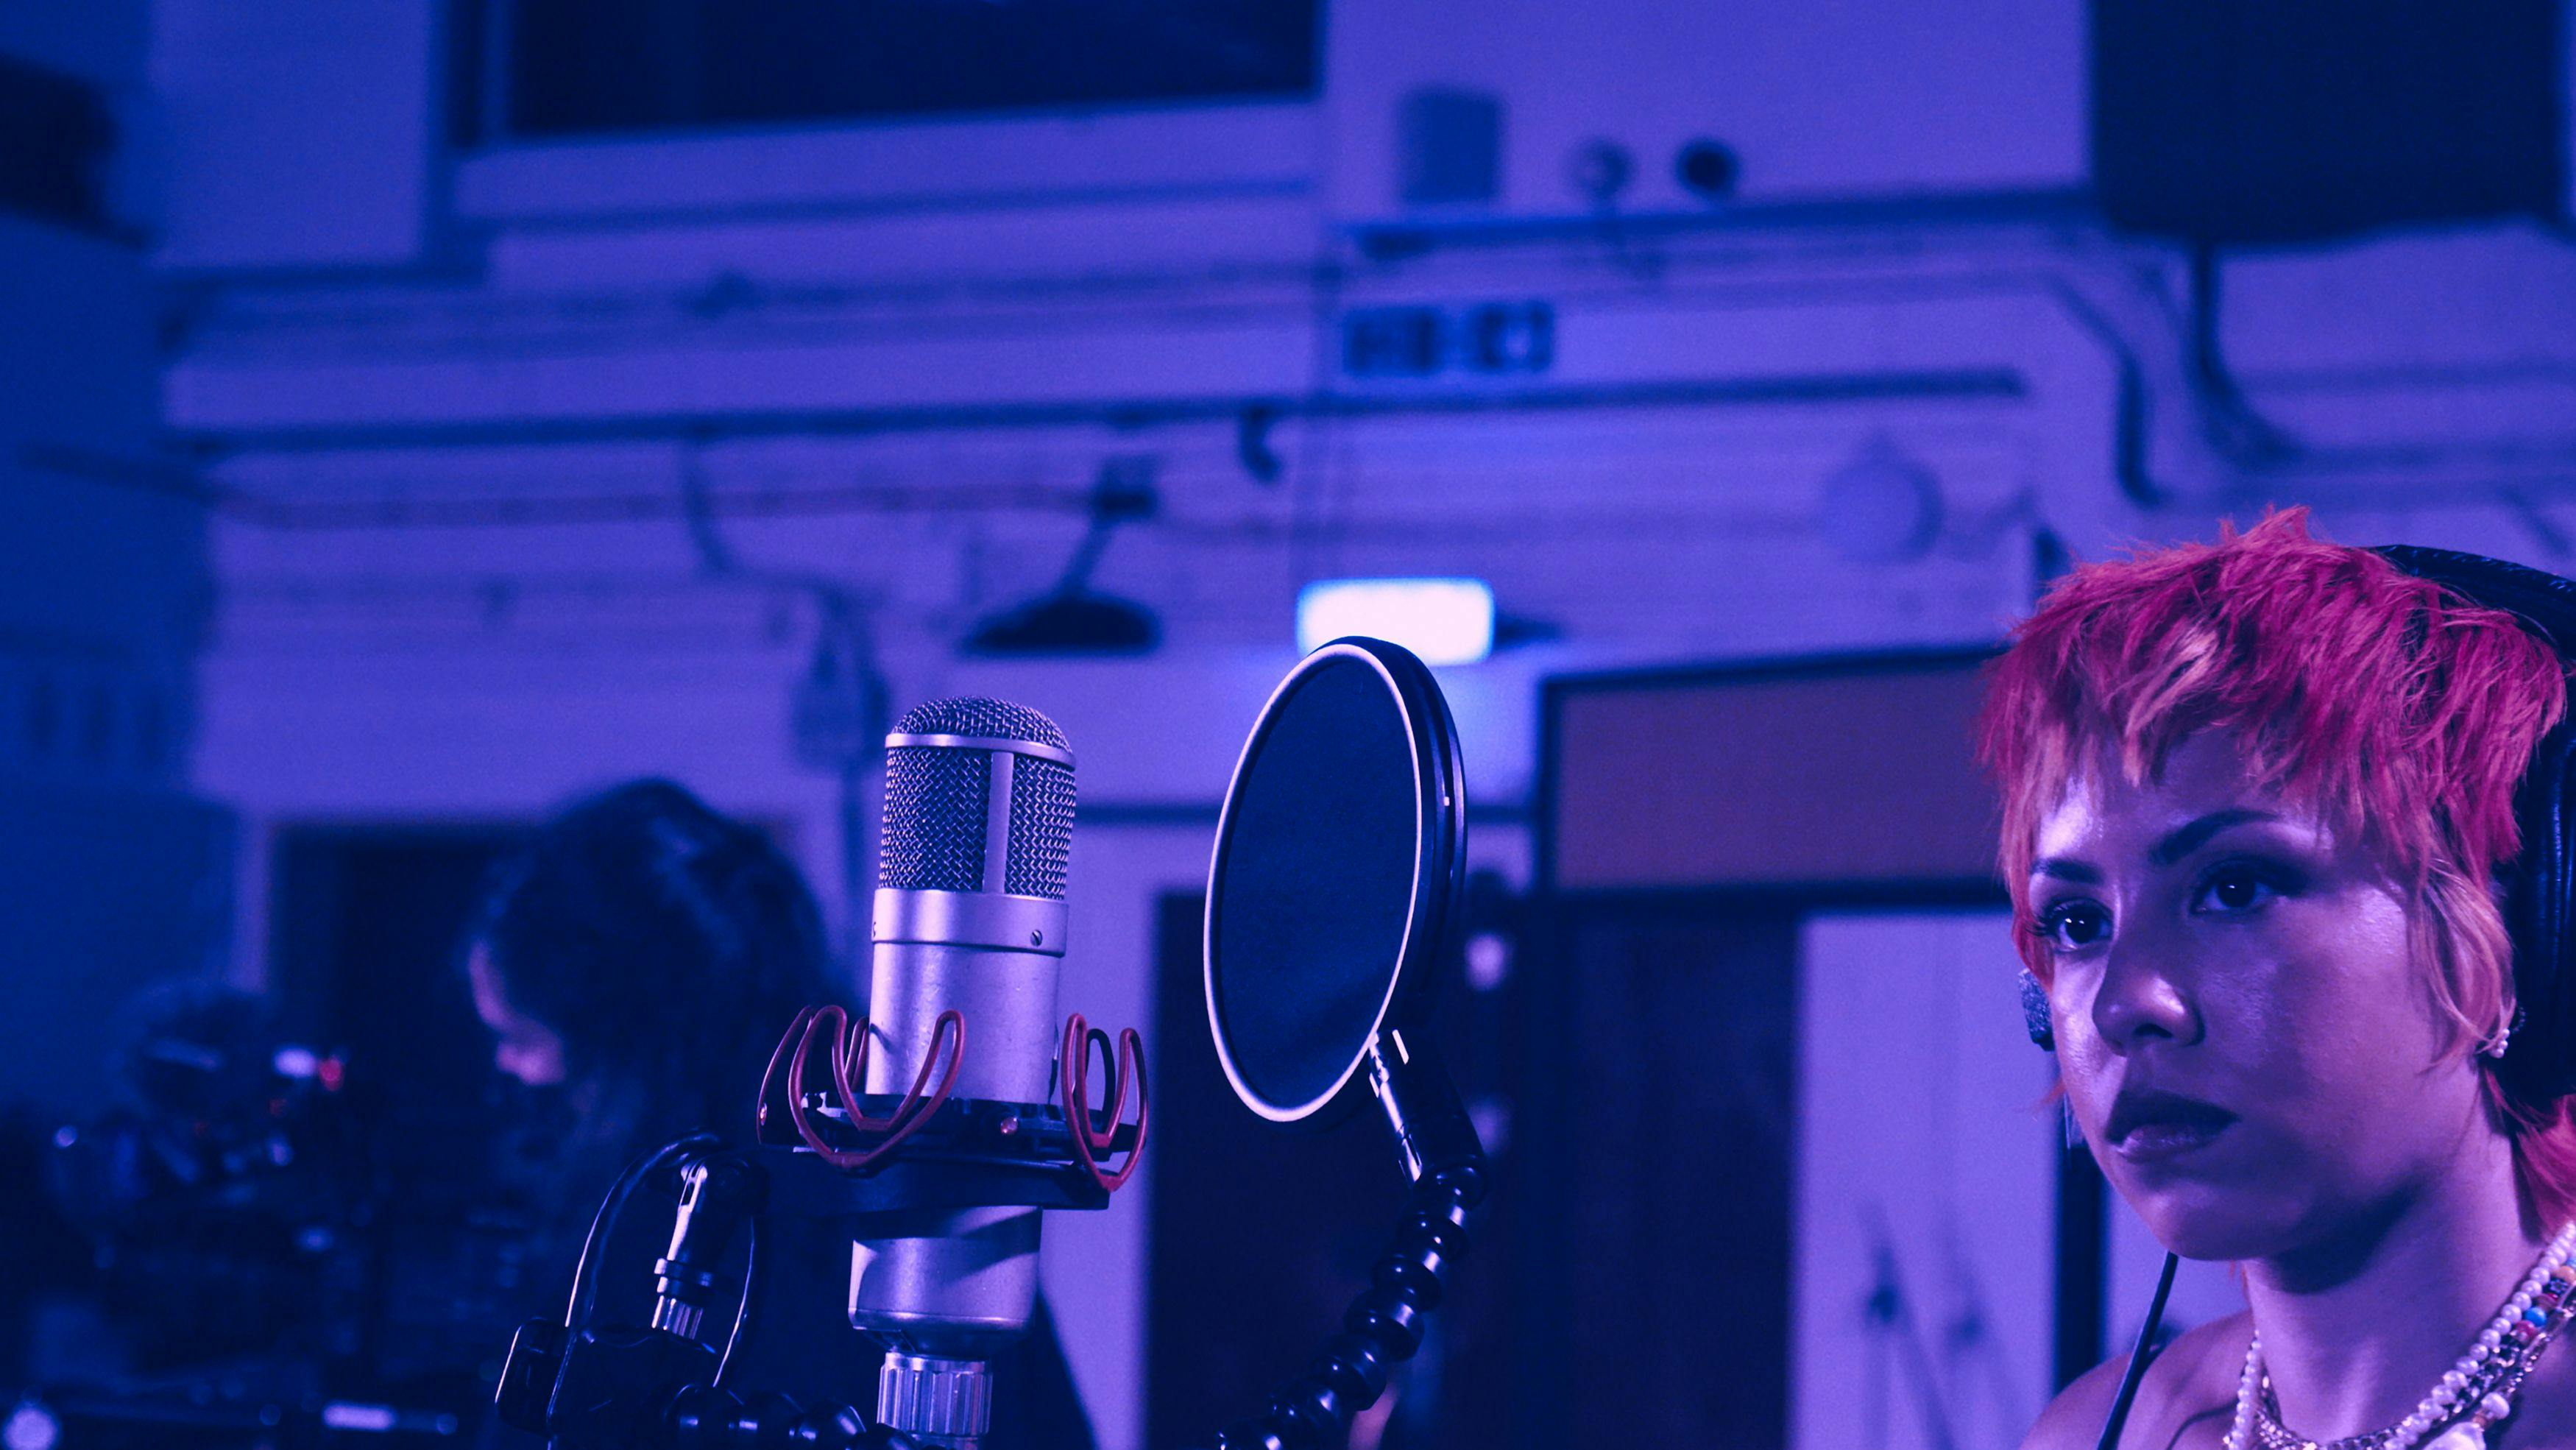 A black woman with red short hair is singing into a microphone in a recording studio, the image has a purple hue